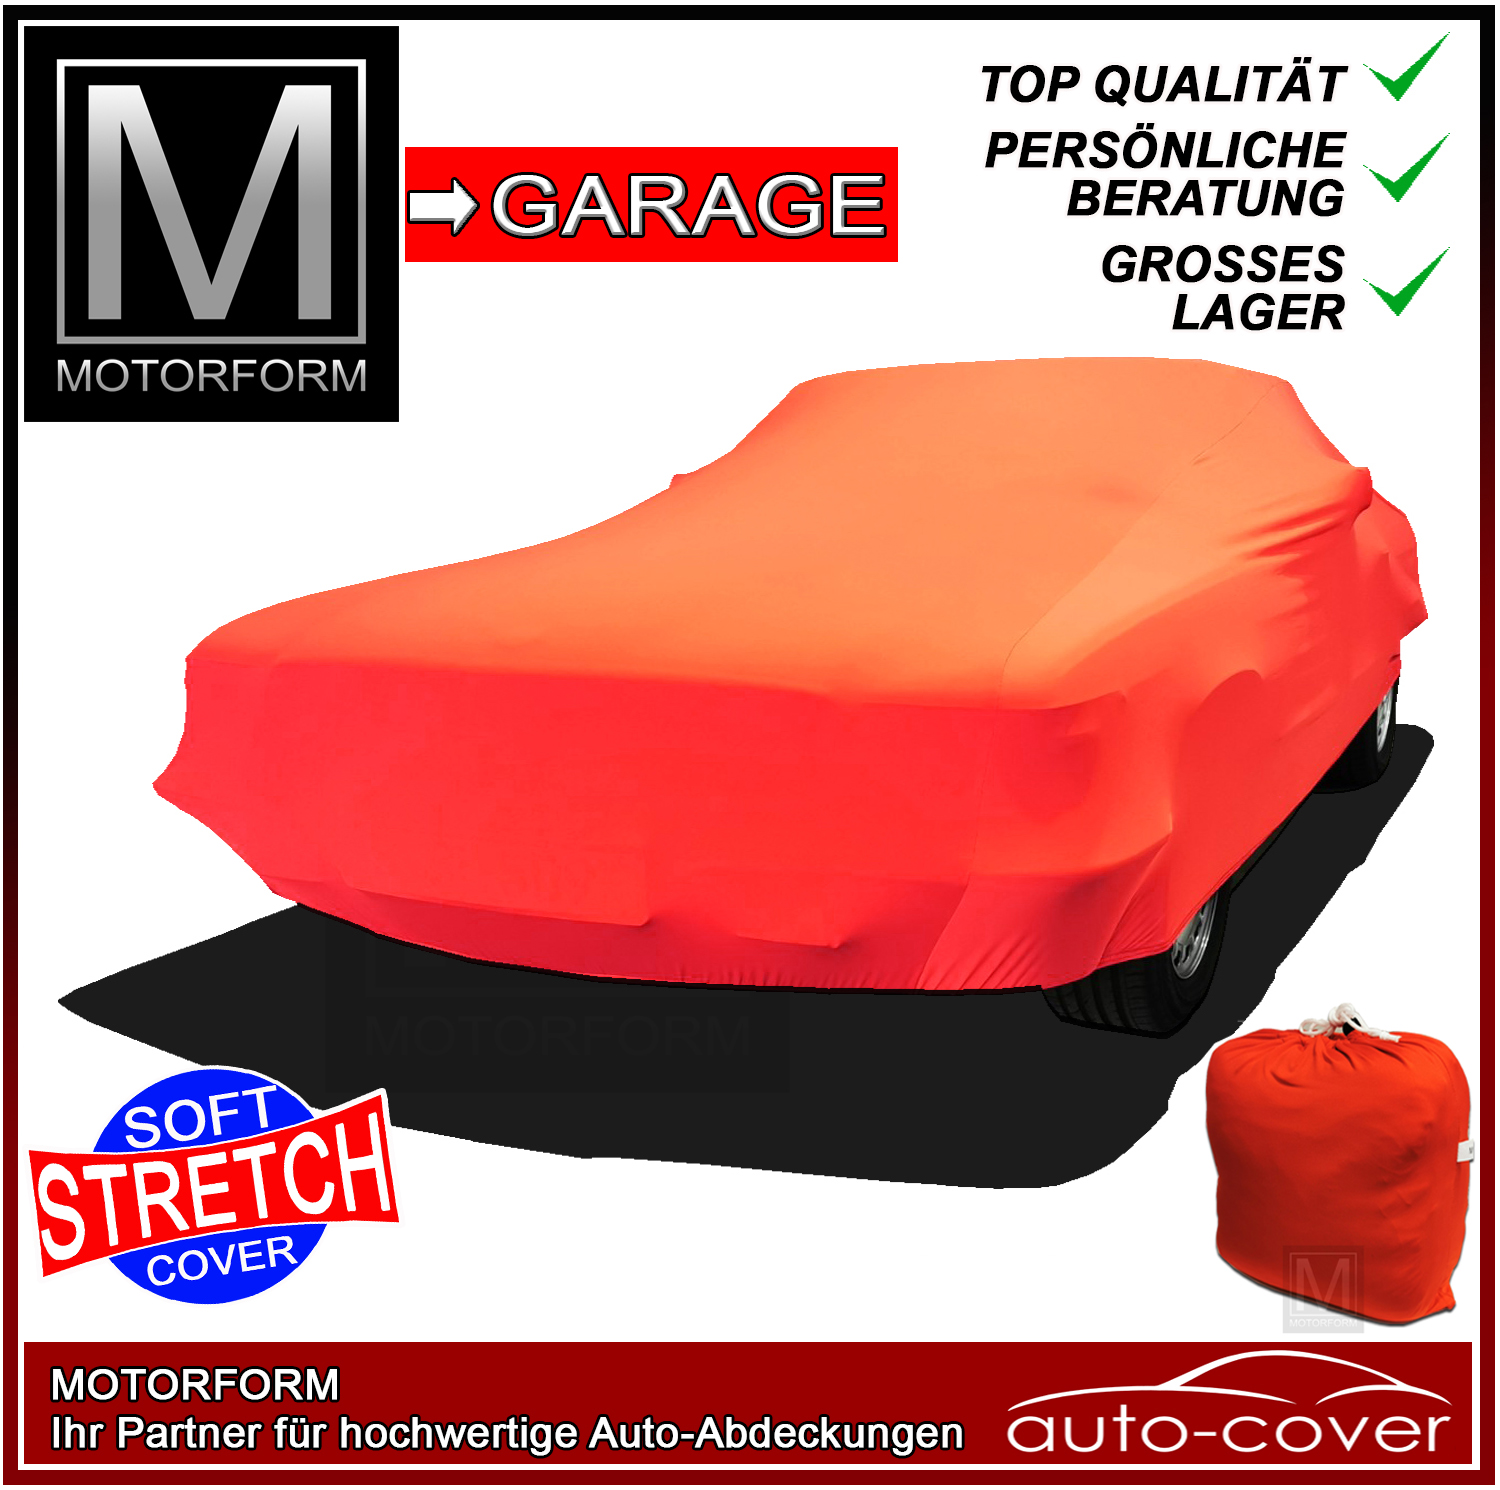 Super Stretchy Cover for Audi A2